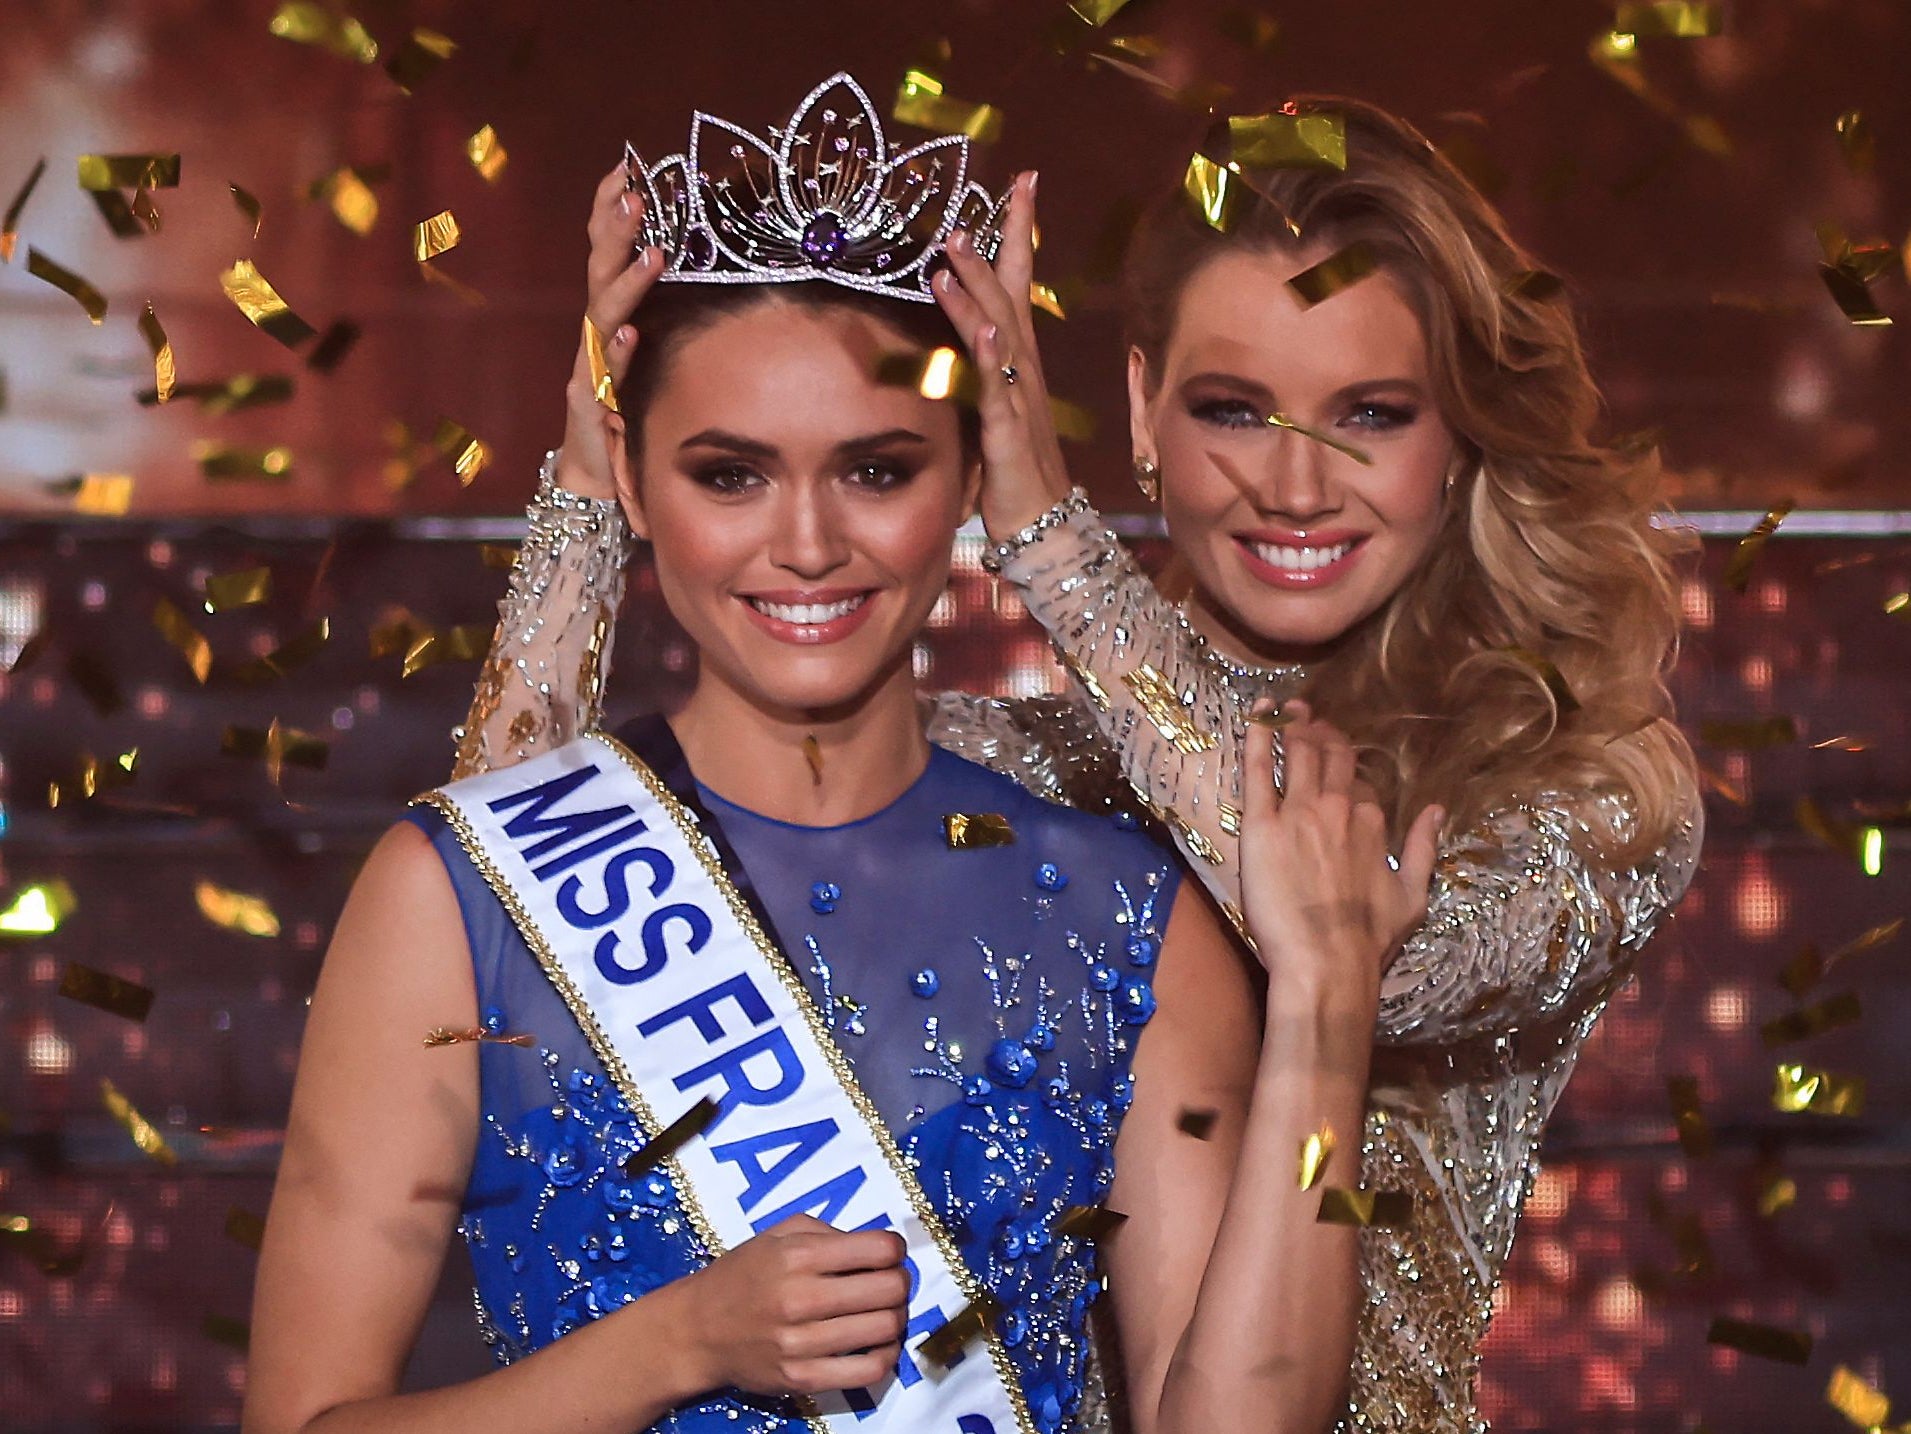 Diana Leyre is crowned Miss France 2022